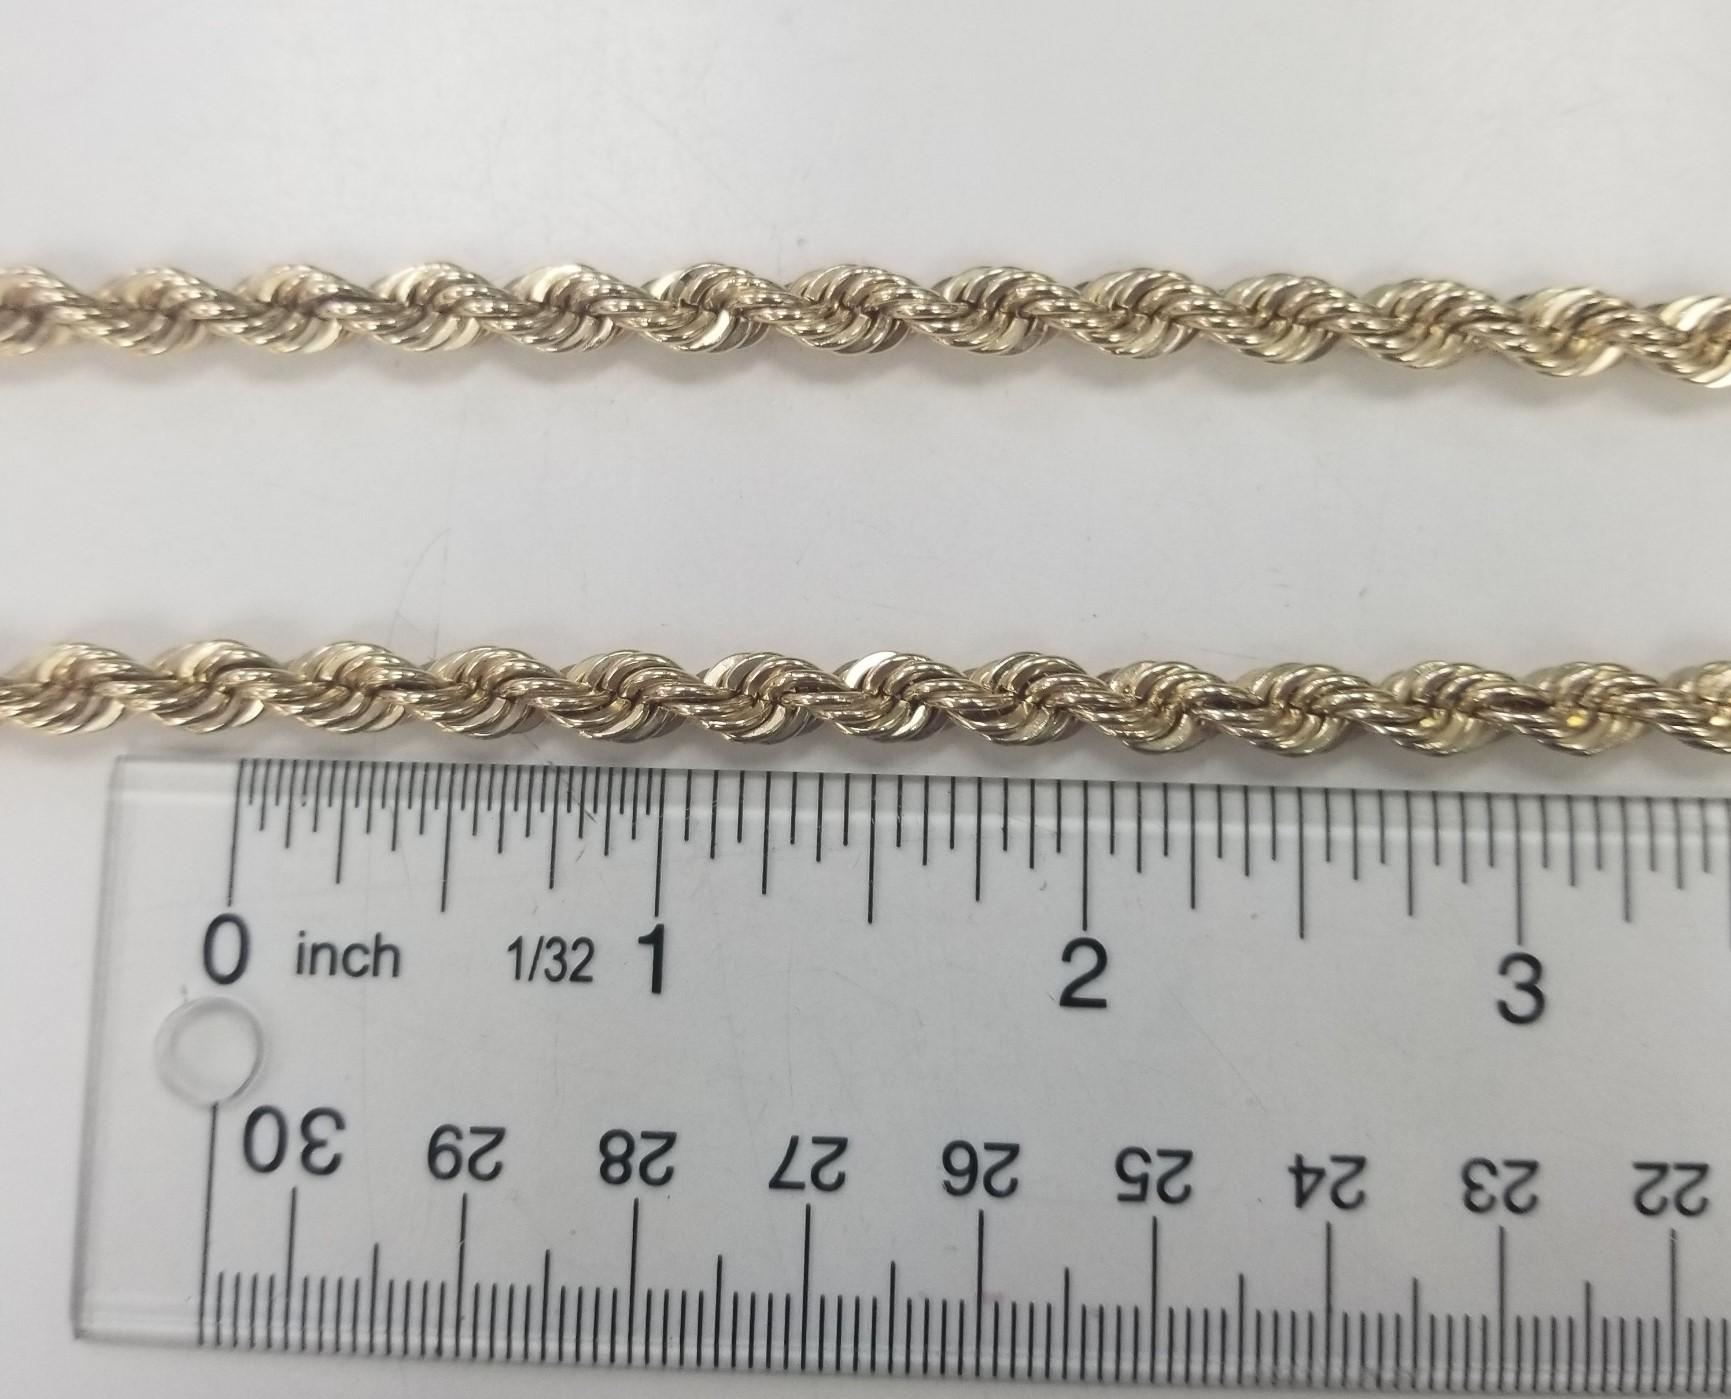 Specifications:
Pre-Owned (Great condition)
Metal: 14k Gold
Weight: 95.3 Gr
Length: 33 inch
Width: 6mm
Clasp: double clasp for safety 